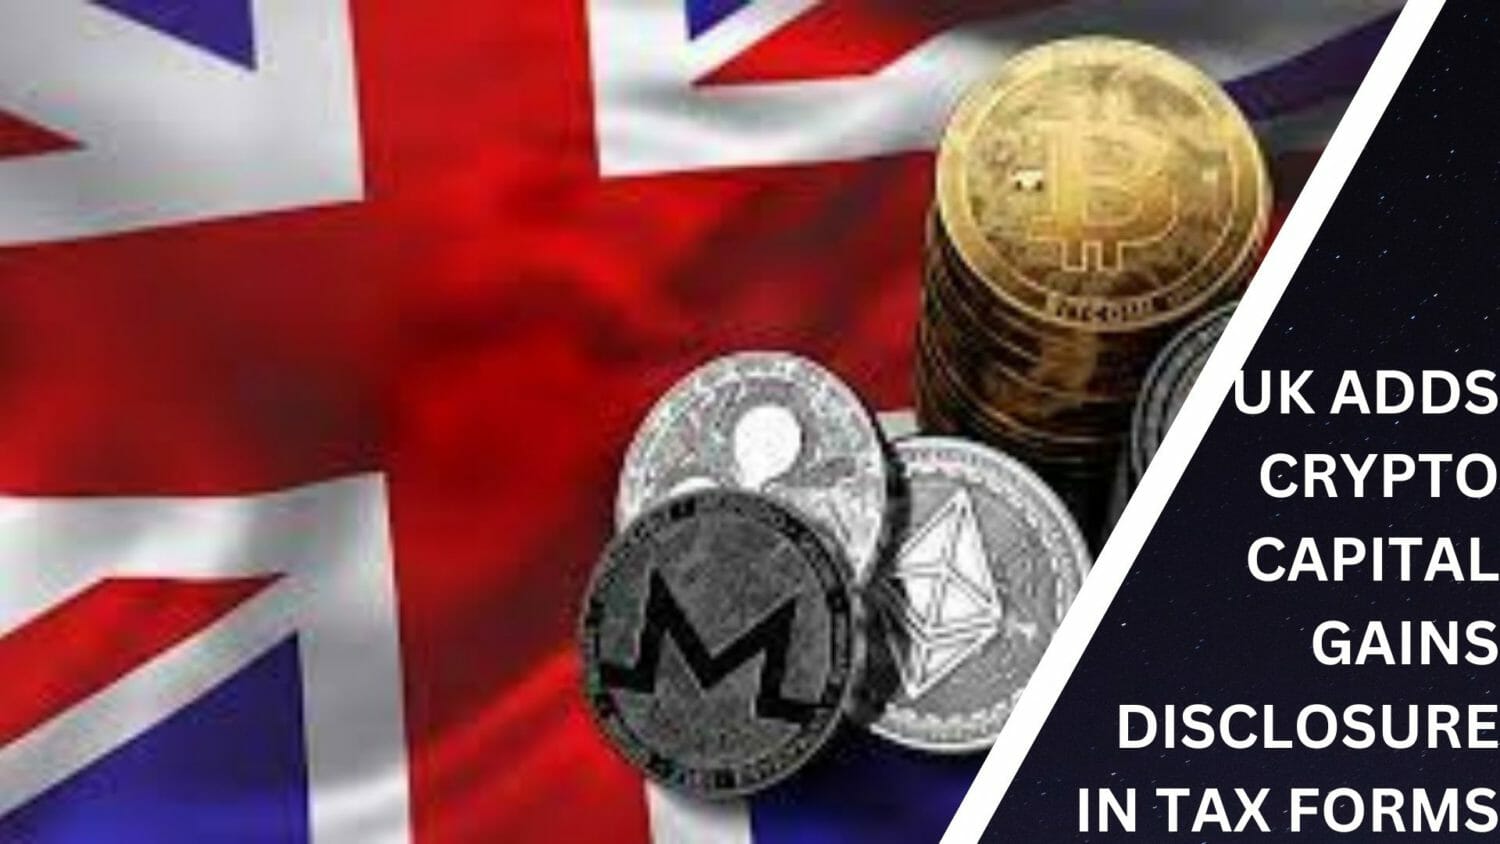 Uk Adds Crypto Capital Gains Disclosure In Tax Forms